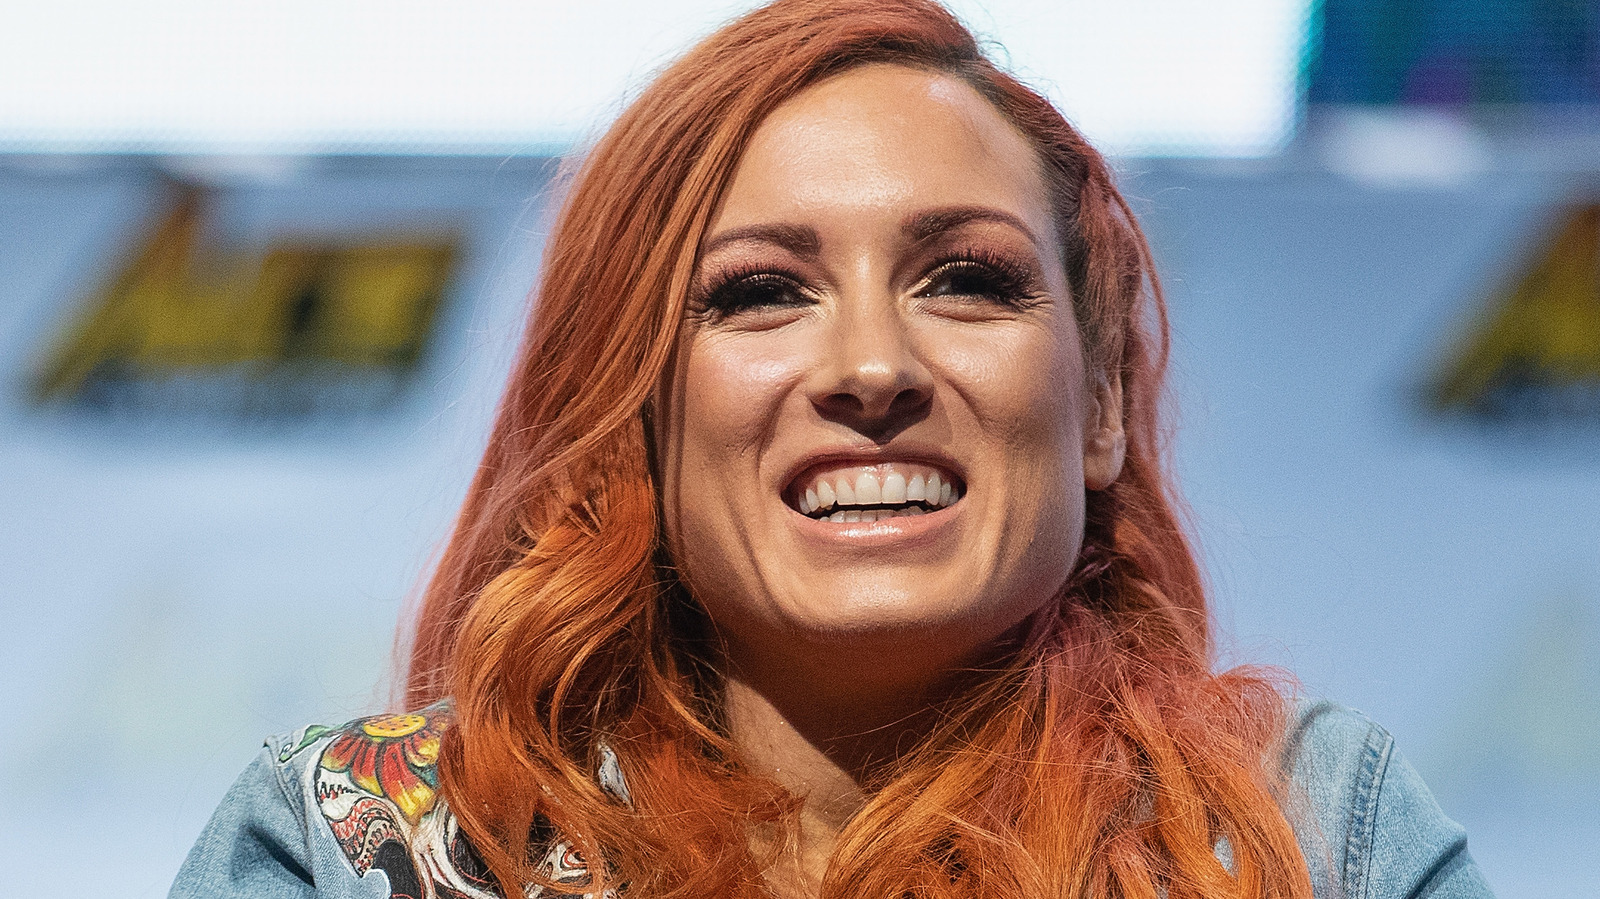 WWE Raw live results: Becky Lynch vs. Bayley steel cage match